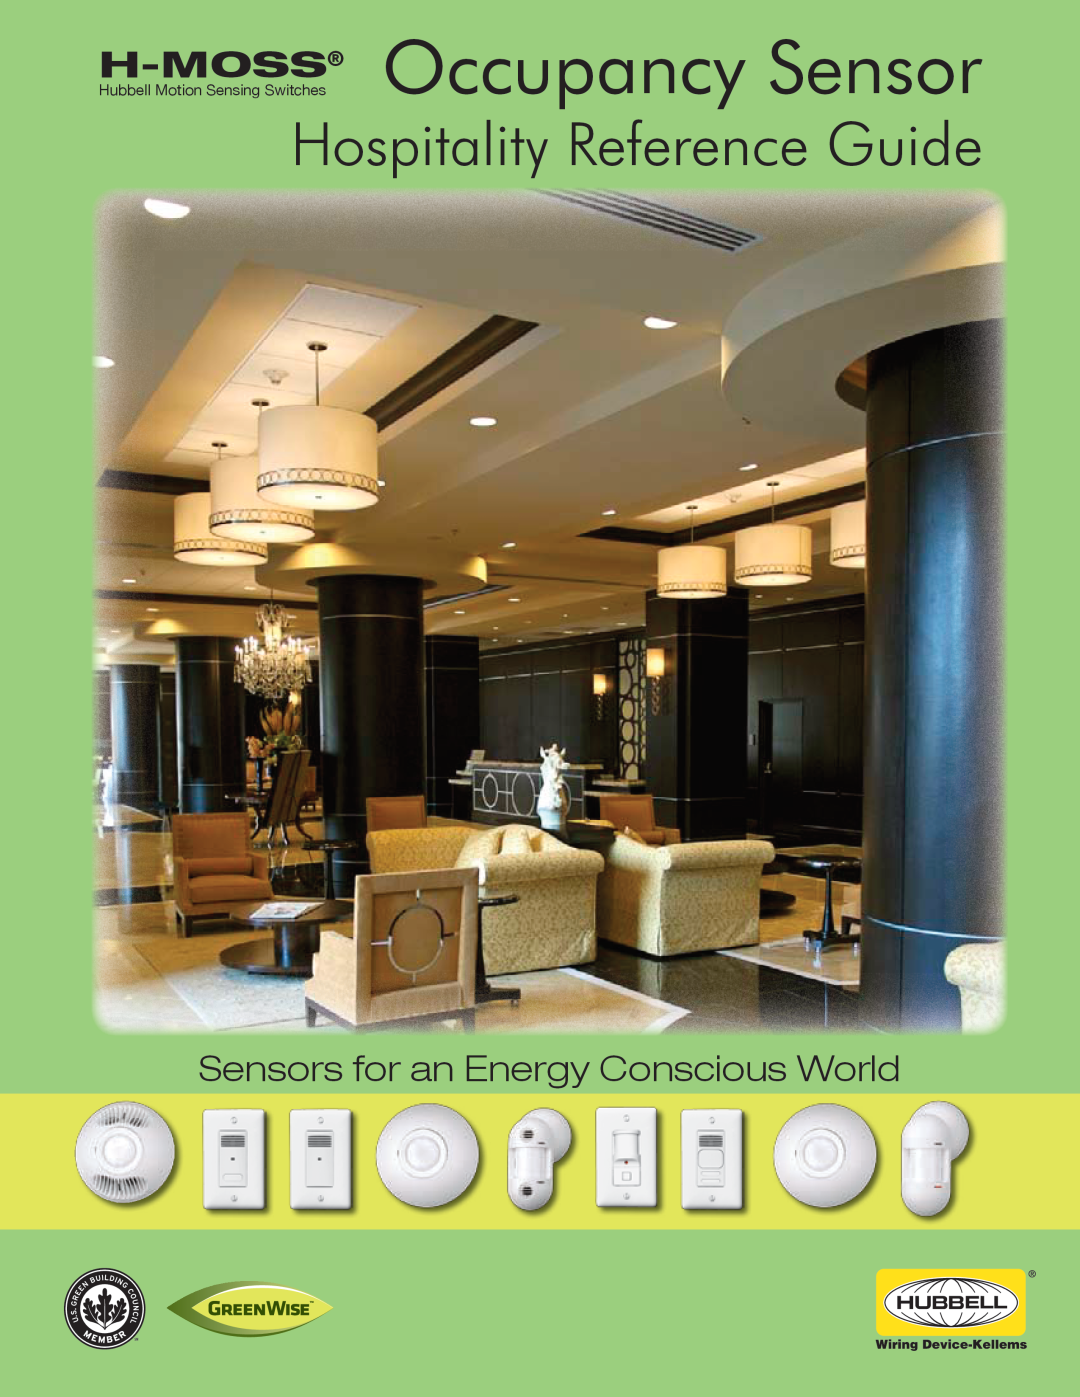 Hubbell CLT1554 manual H-MOSS Occupancy Sensor, Hospitality Reference Guide, Sensors for an Energy Conscious World 